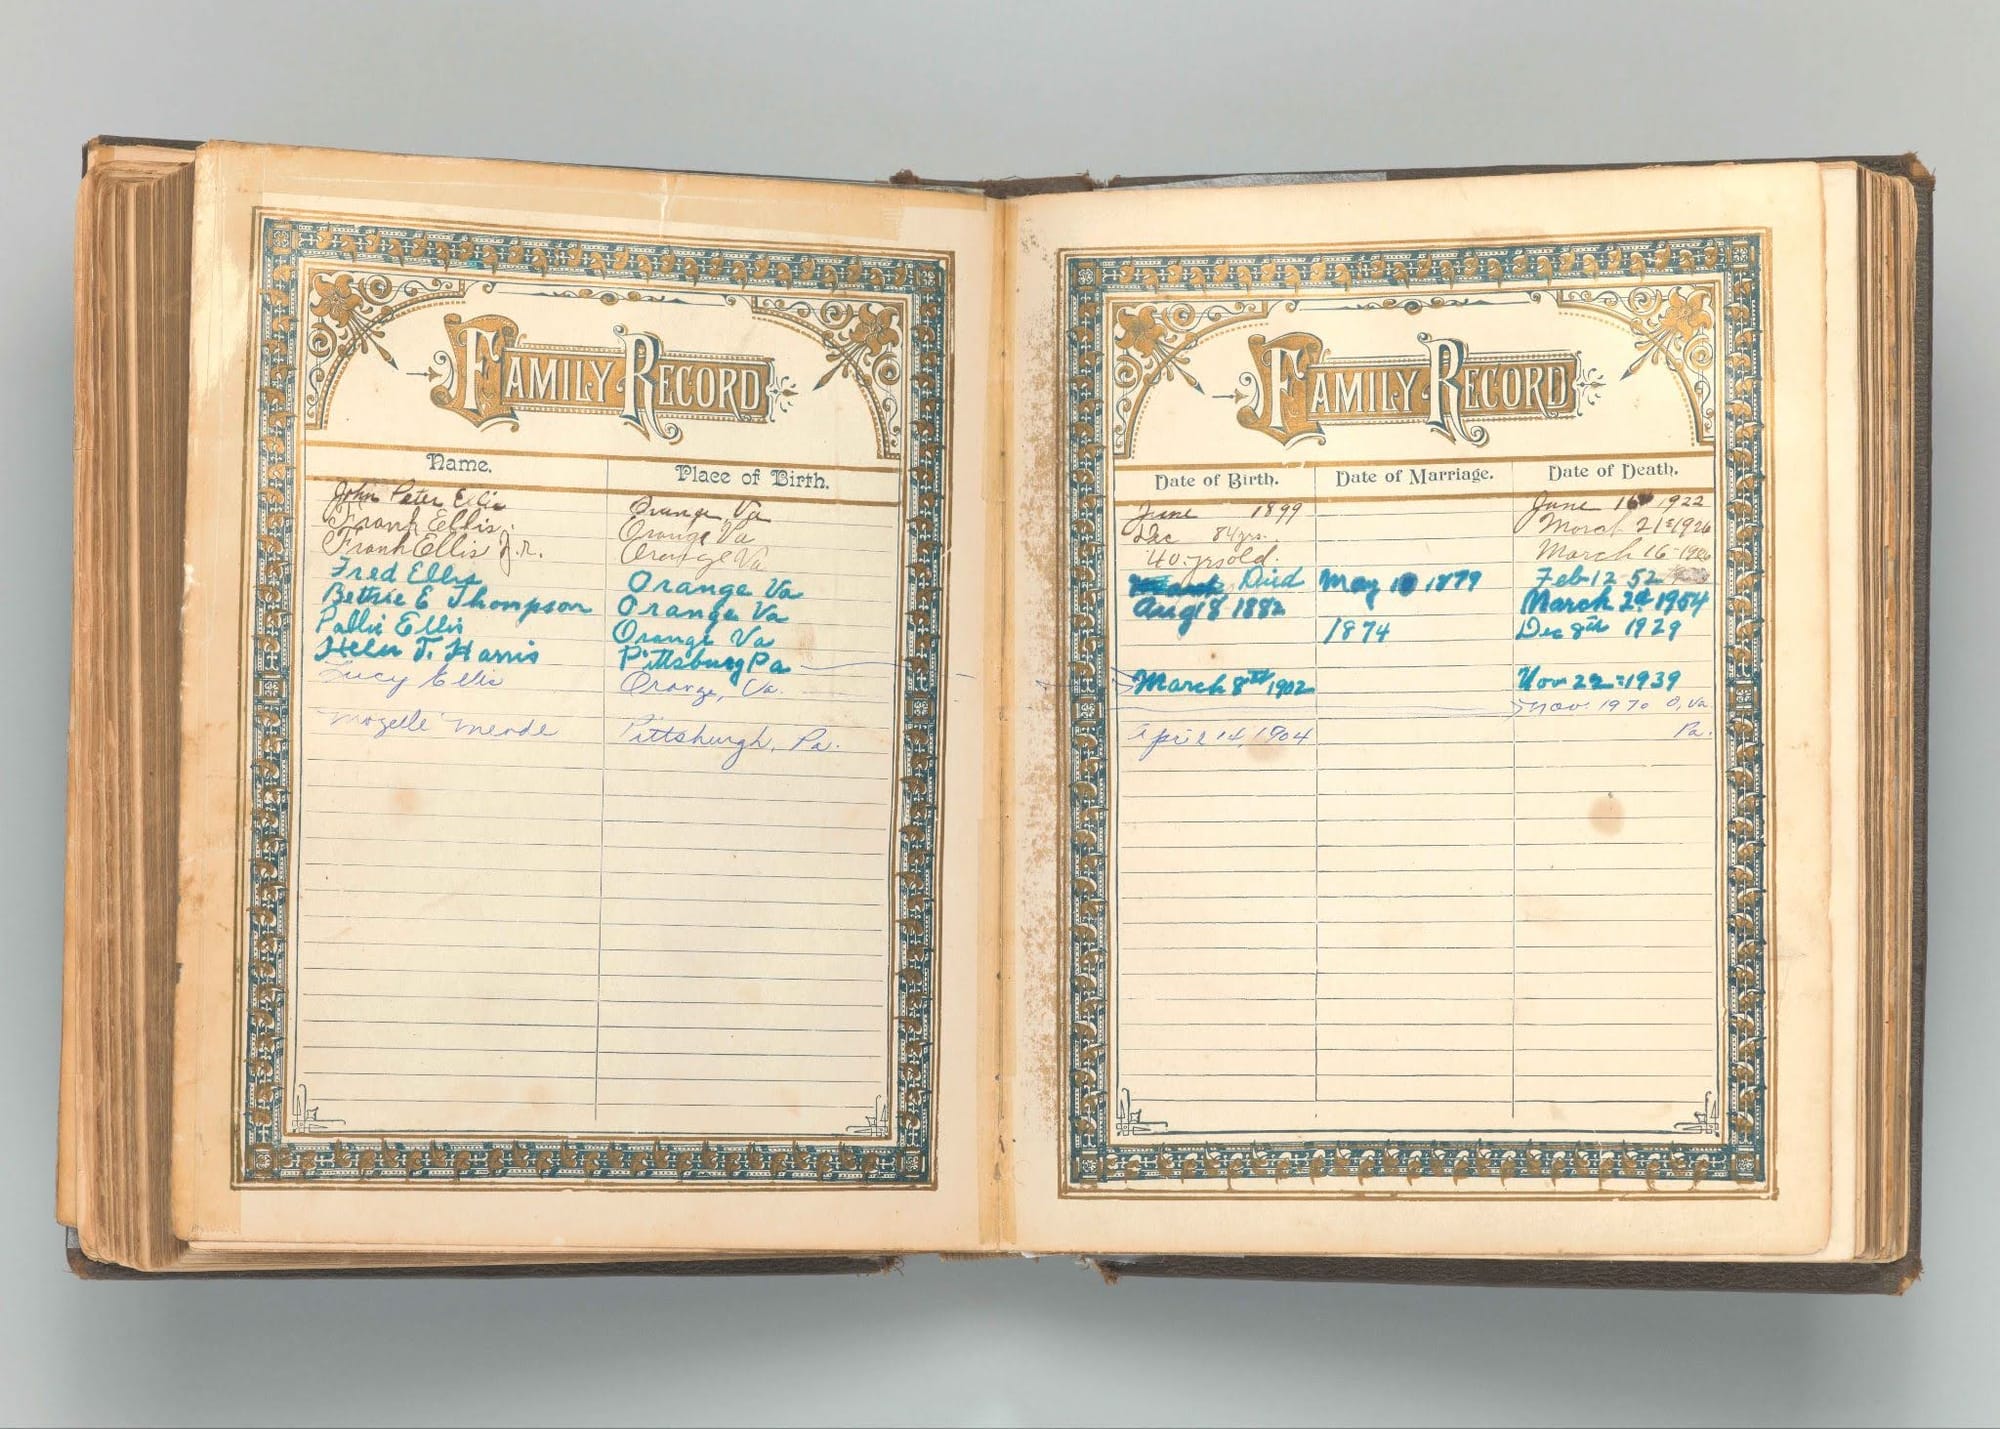 An open book with "Family Record" pages and handwritten entries in the table.